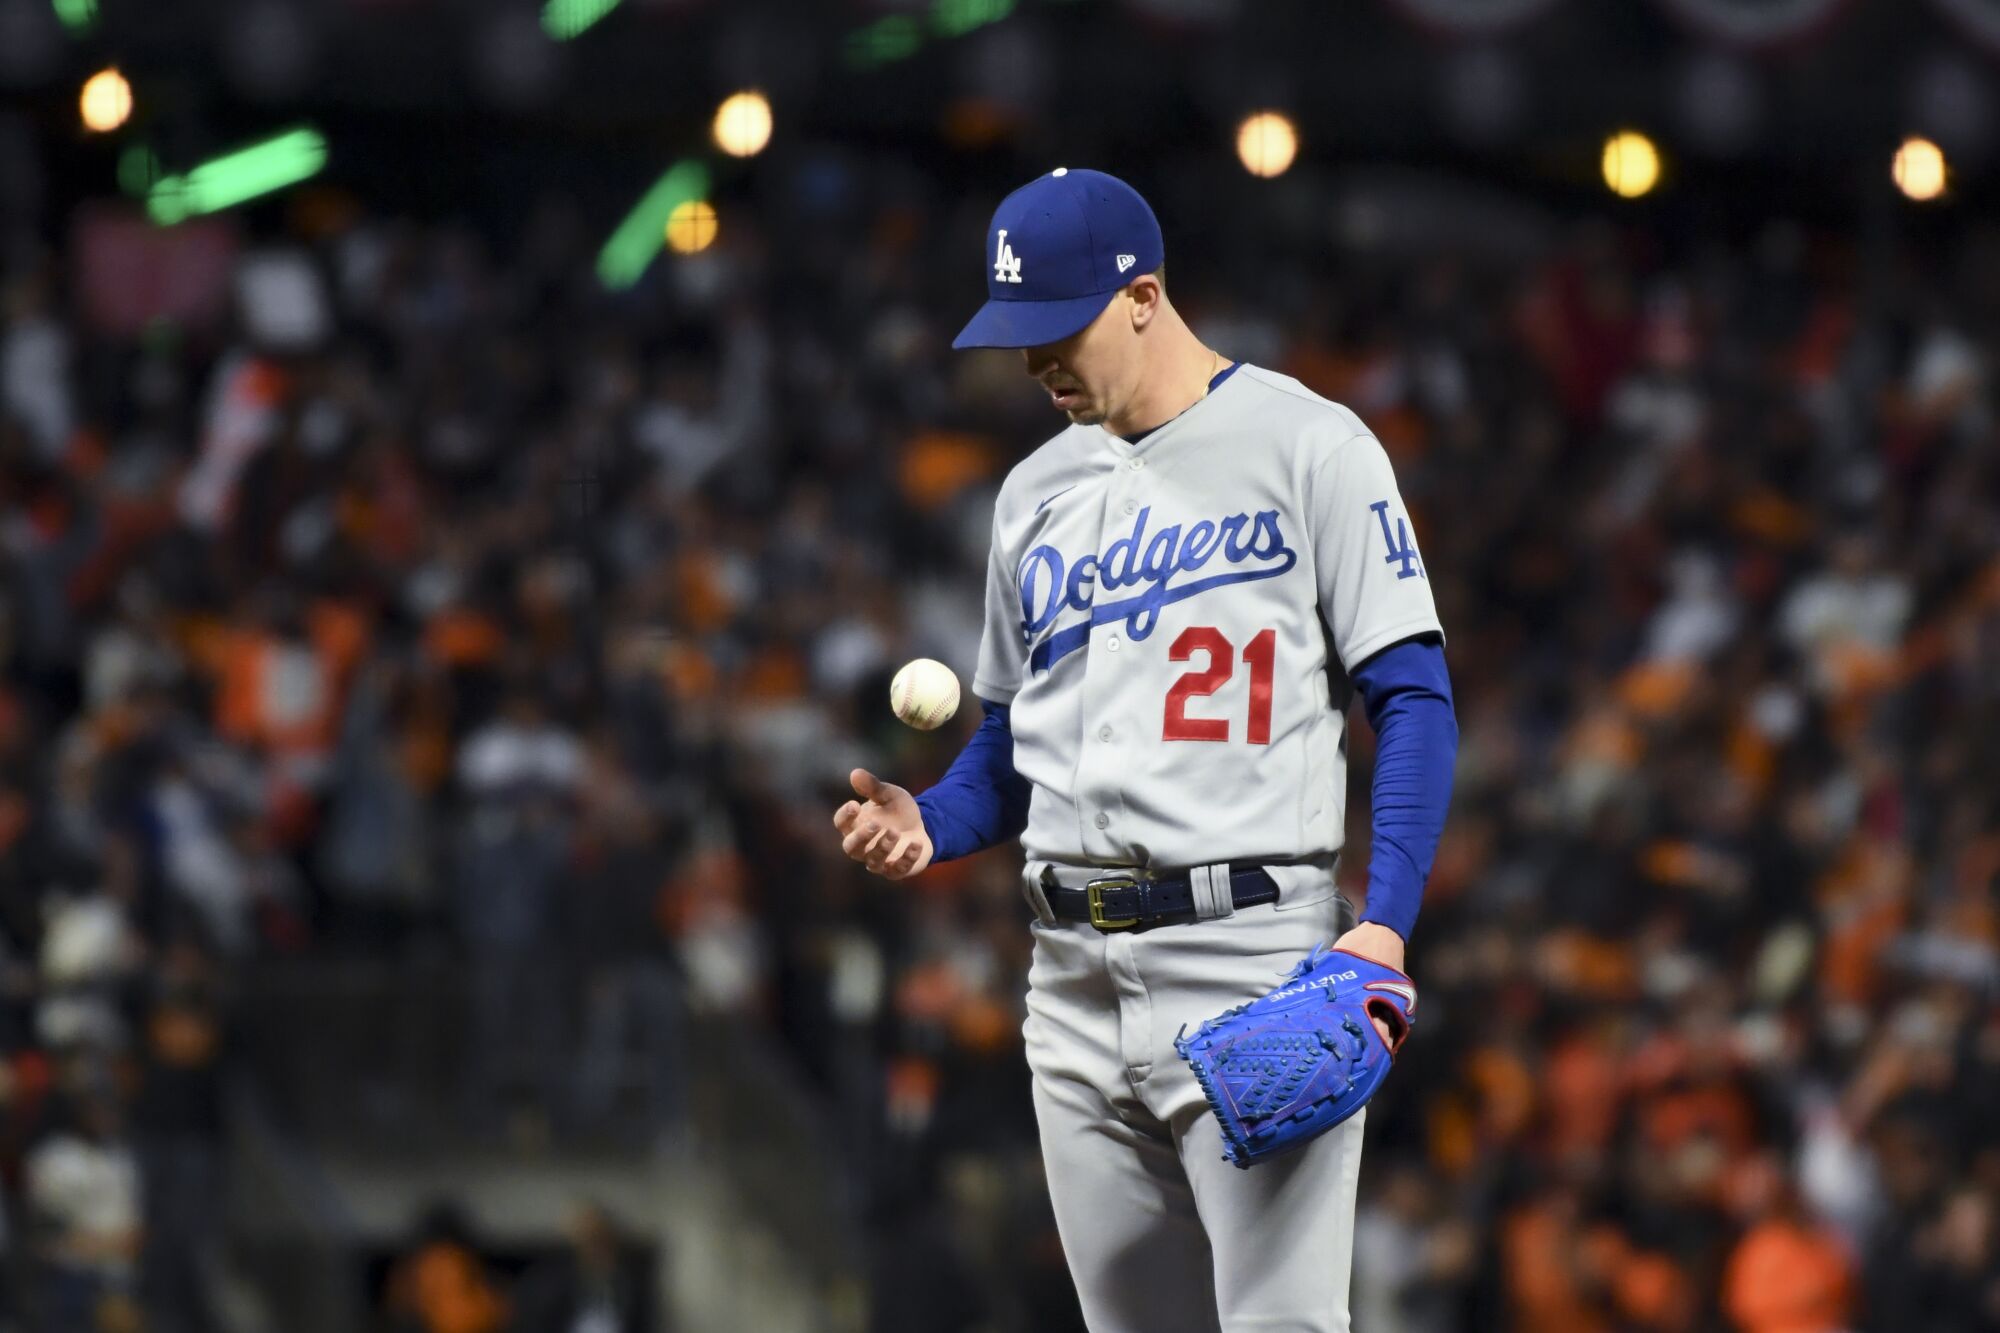  Dodgers starting pitcher Walker Buehler tosses the ball after giving up a two-run home run.